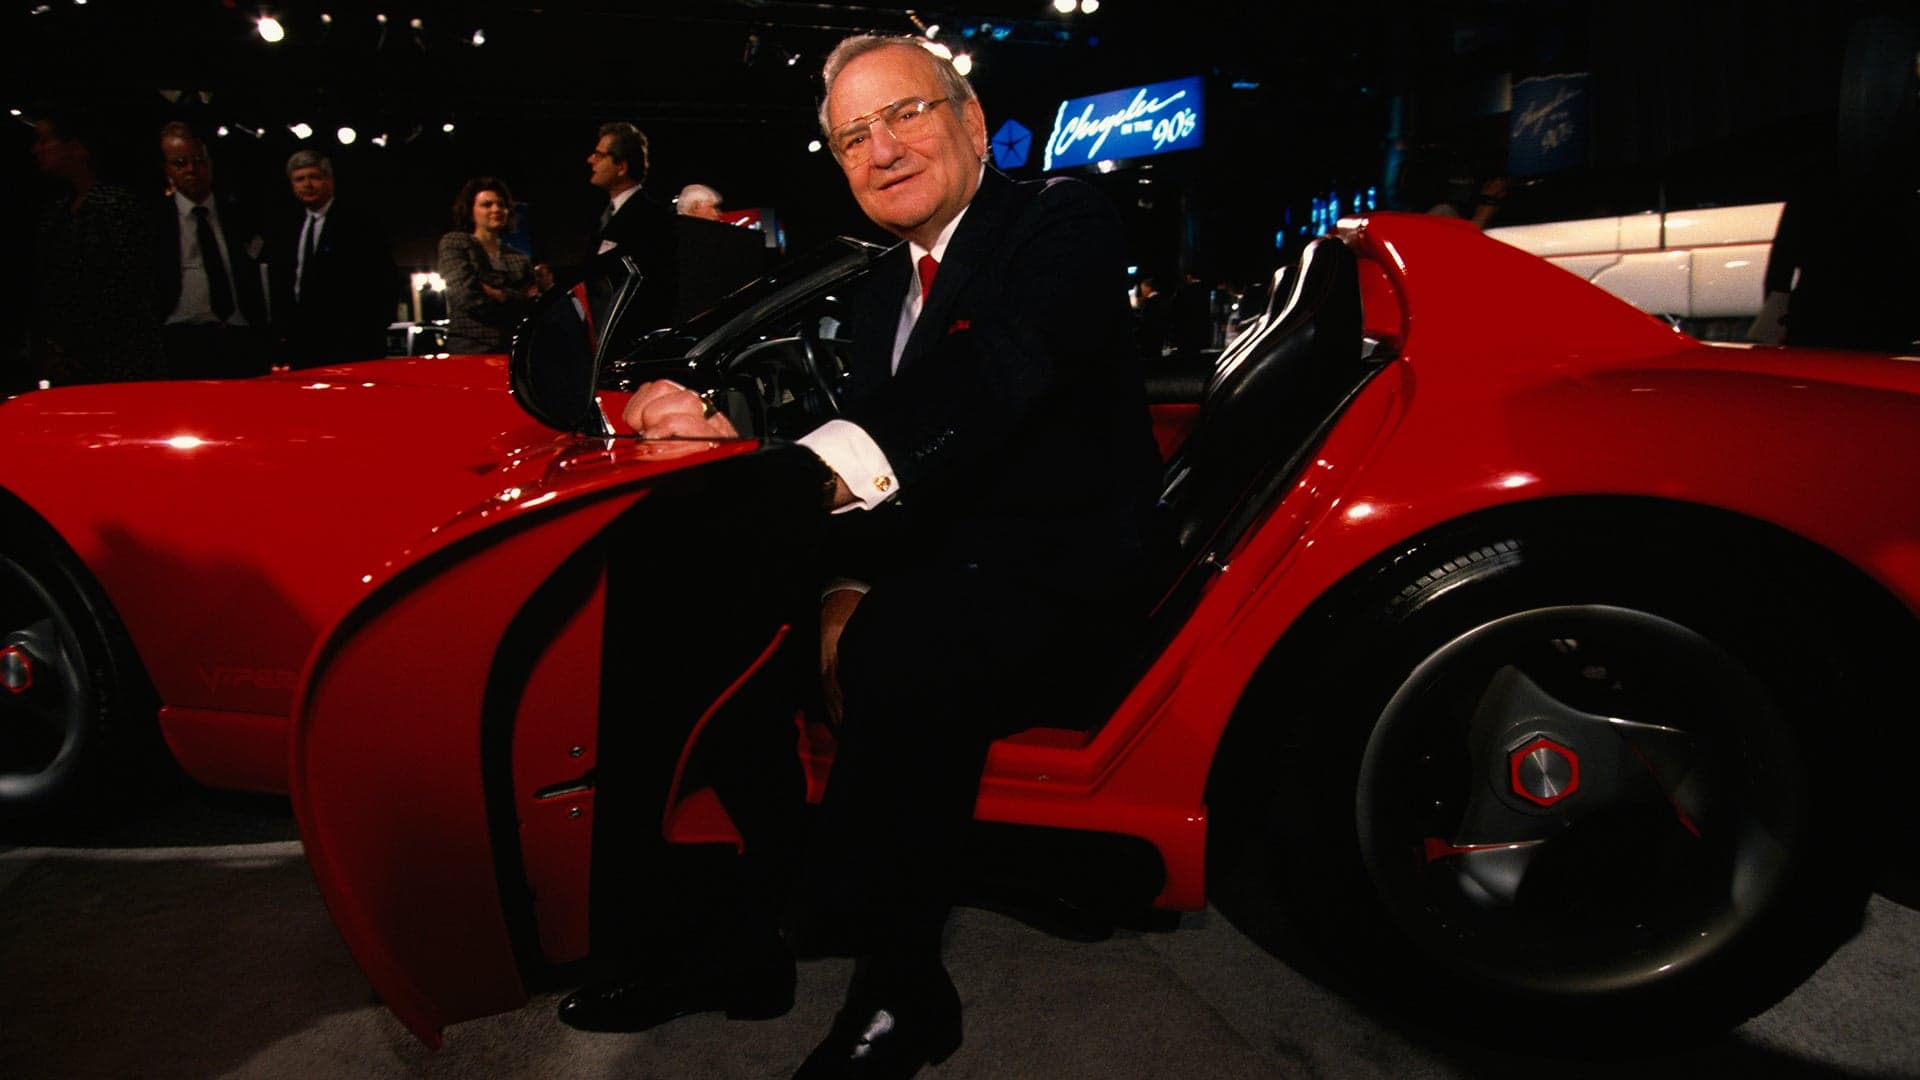 Lee Iacocca, Father of the Ford Mustang and Savior of Chrysler, Dead at 94